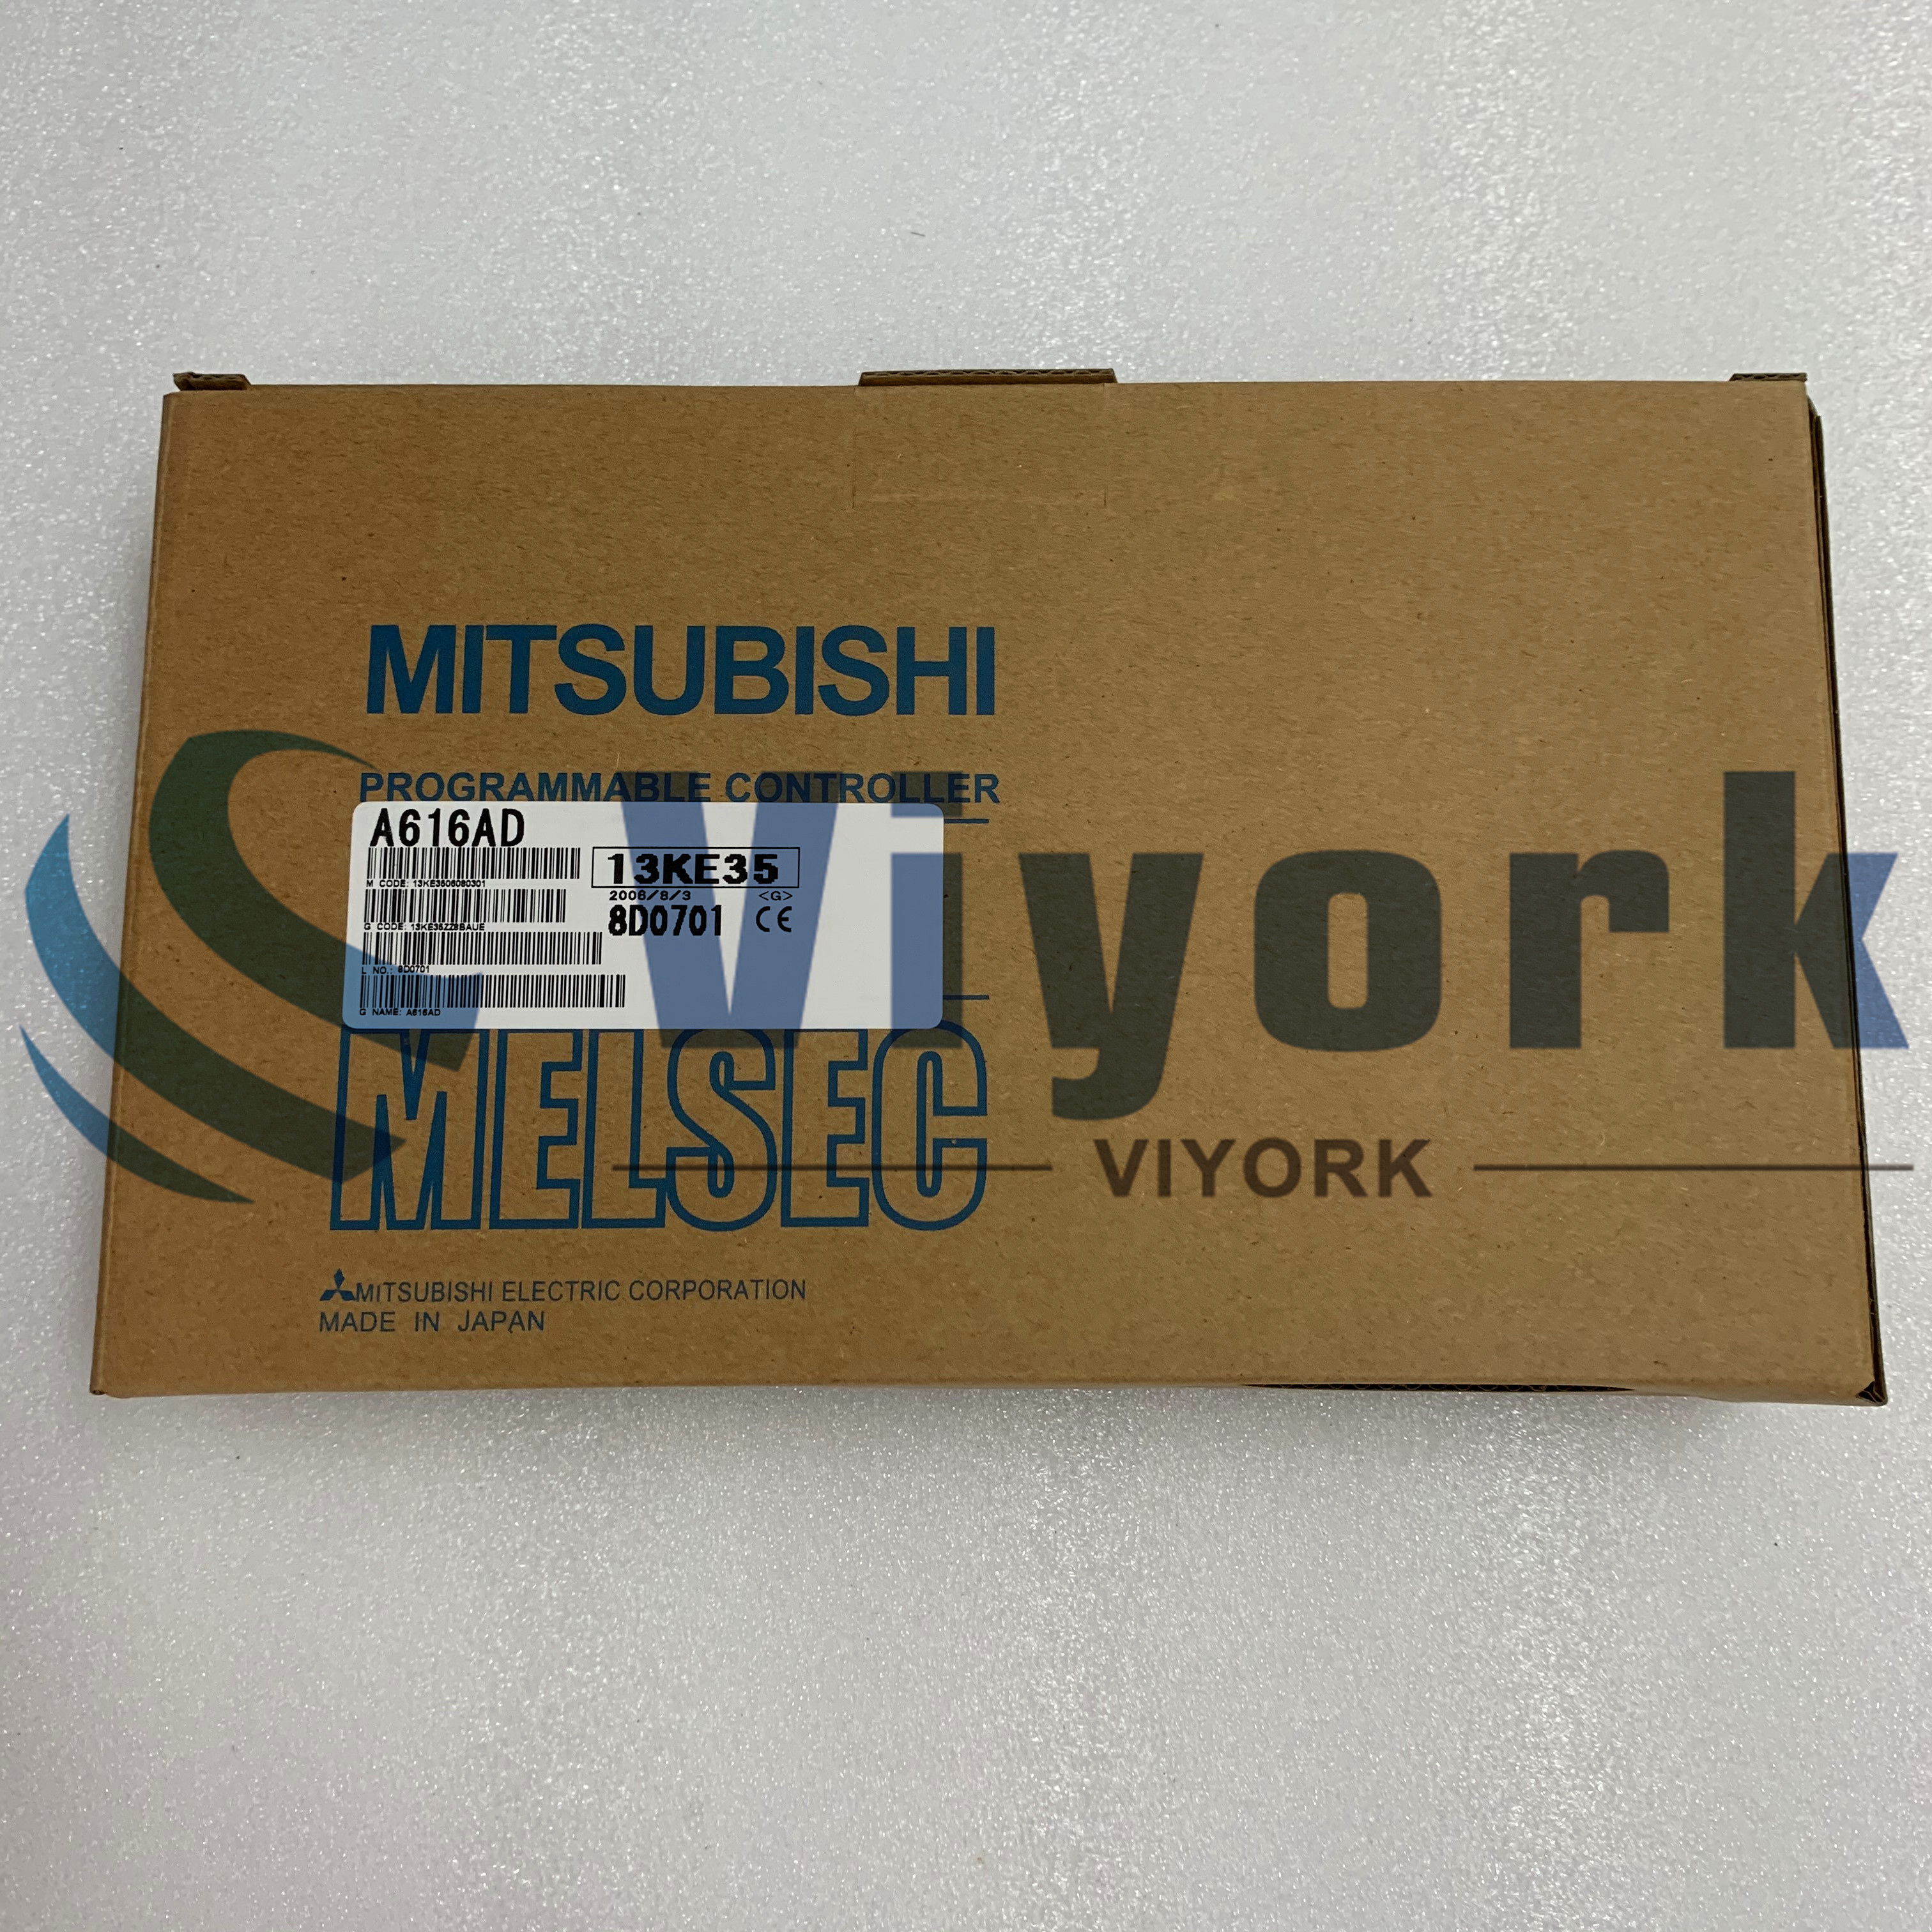 Mitsubishi A616AD CONTROLLER PROGRAMMABLE ANALOG INPUT 16-CHANNEL NEW